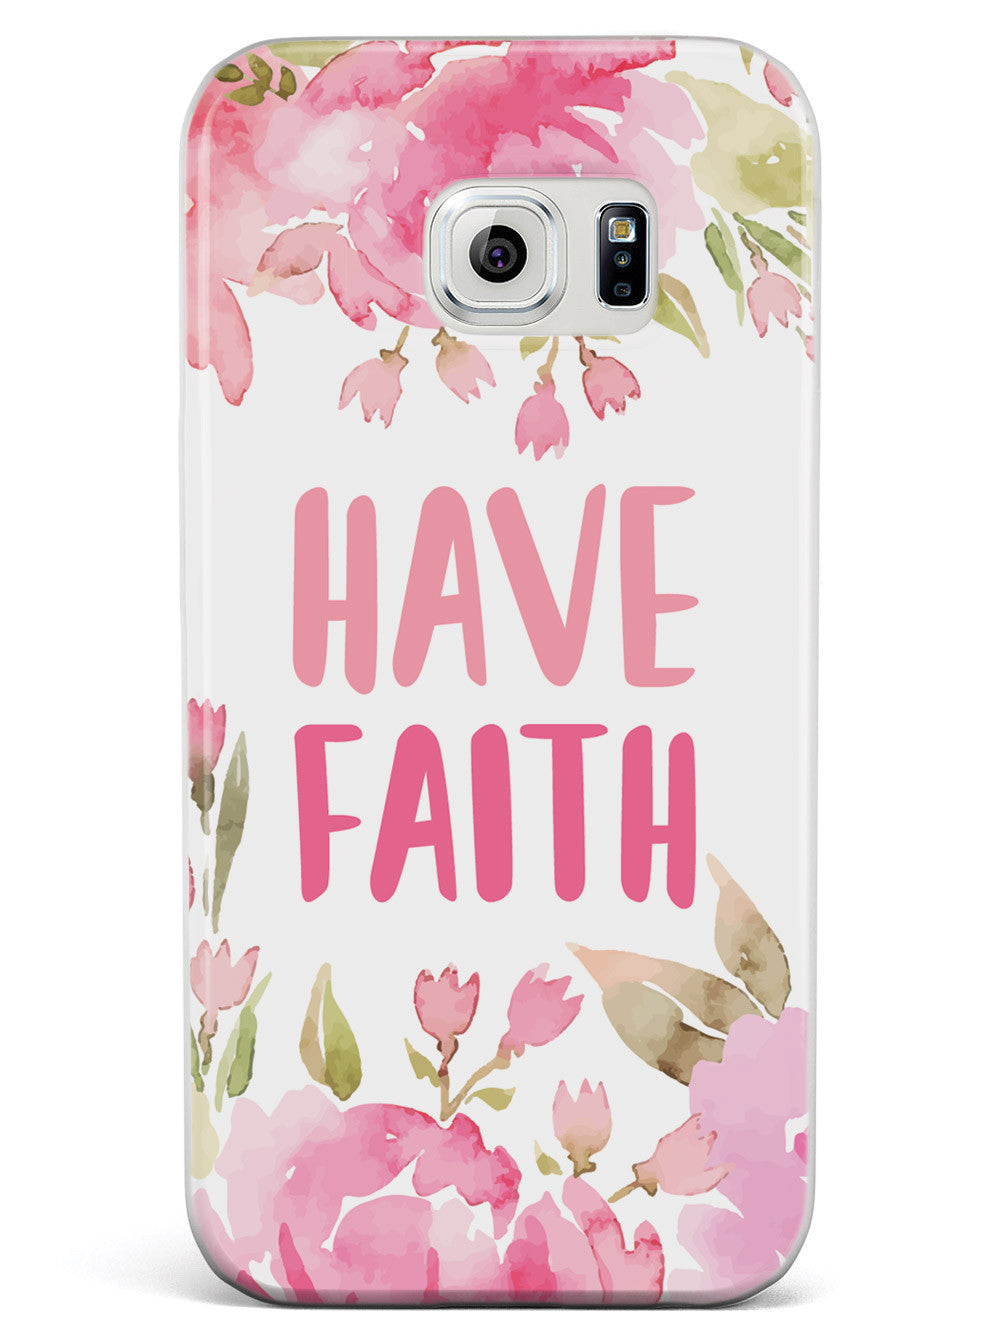 Have Faith - Pink Flowers Case